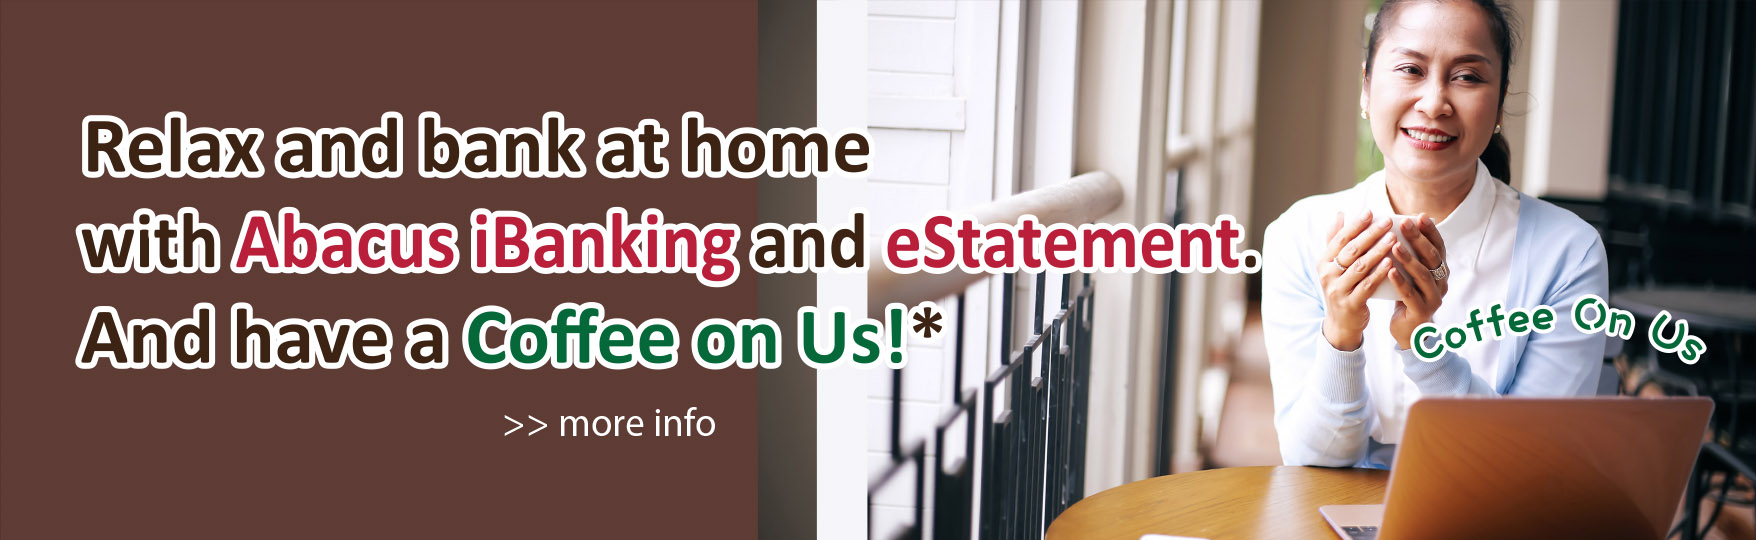 Relax and bank at home with Abacus iBanking and eStatements. And have a Coffee on Us!* more info